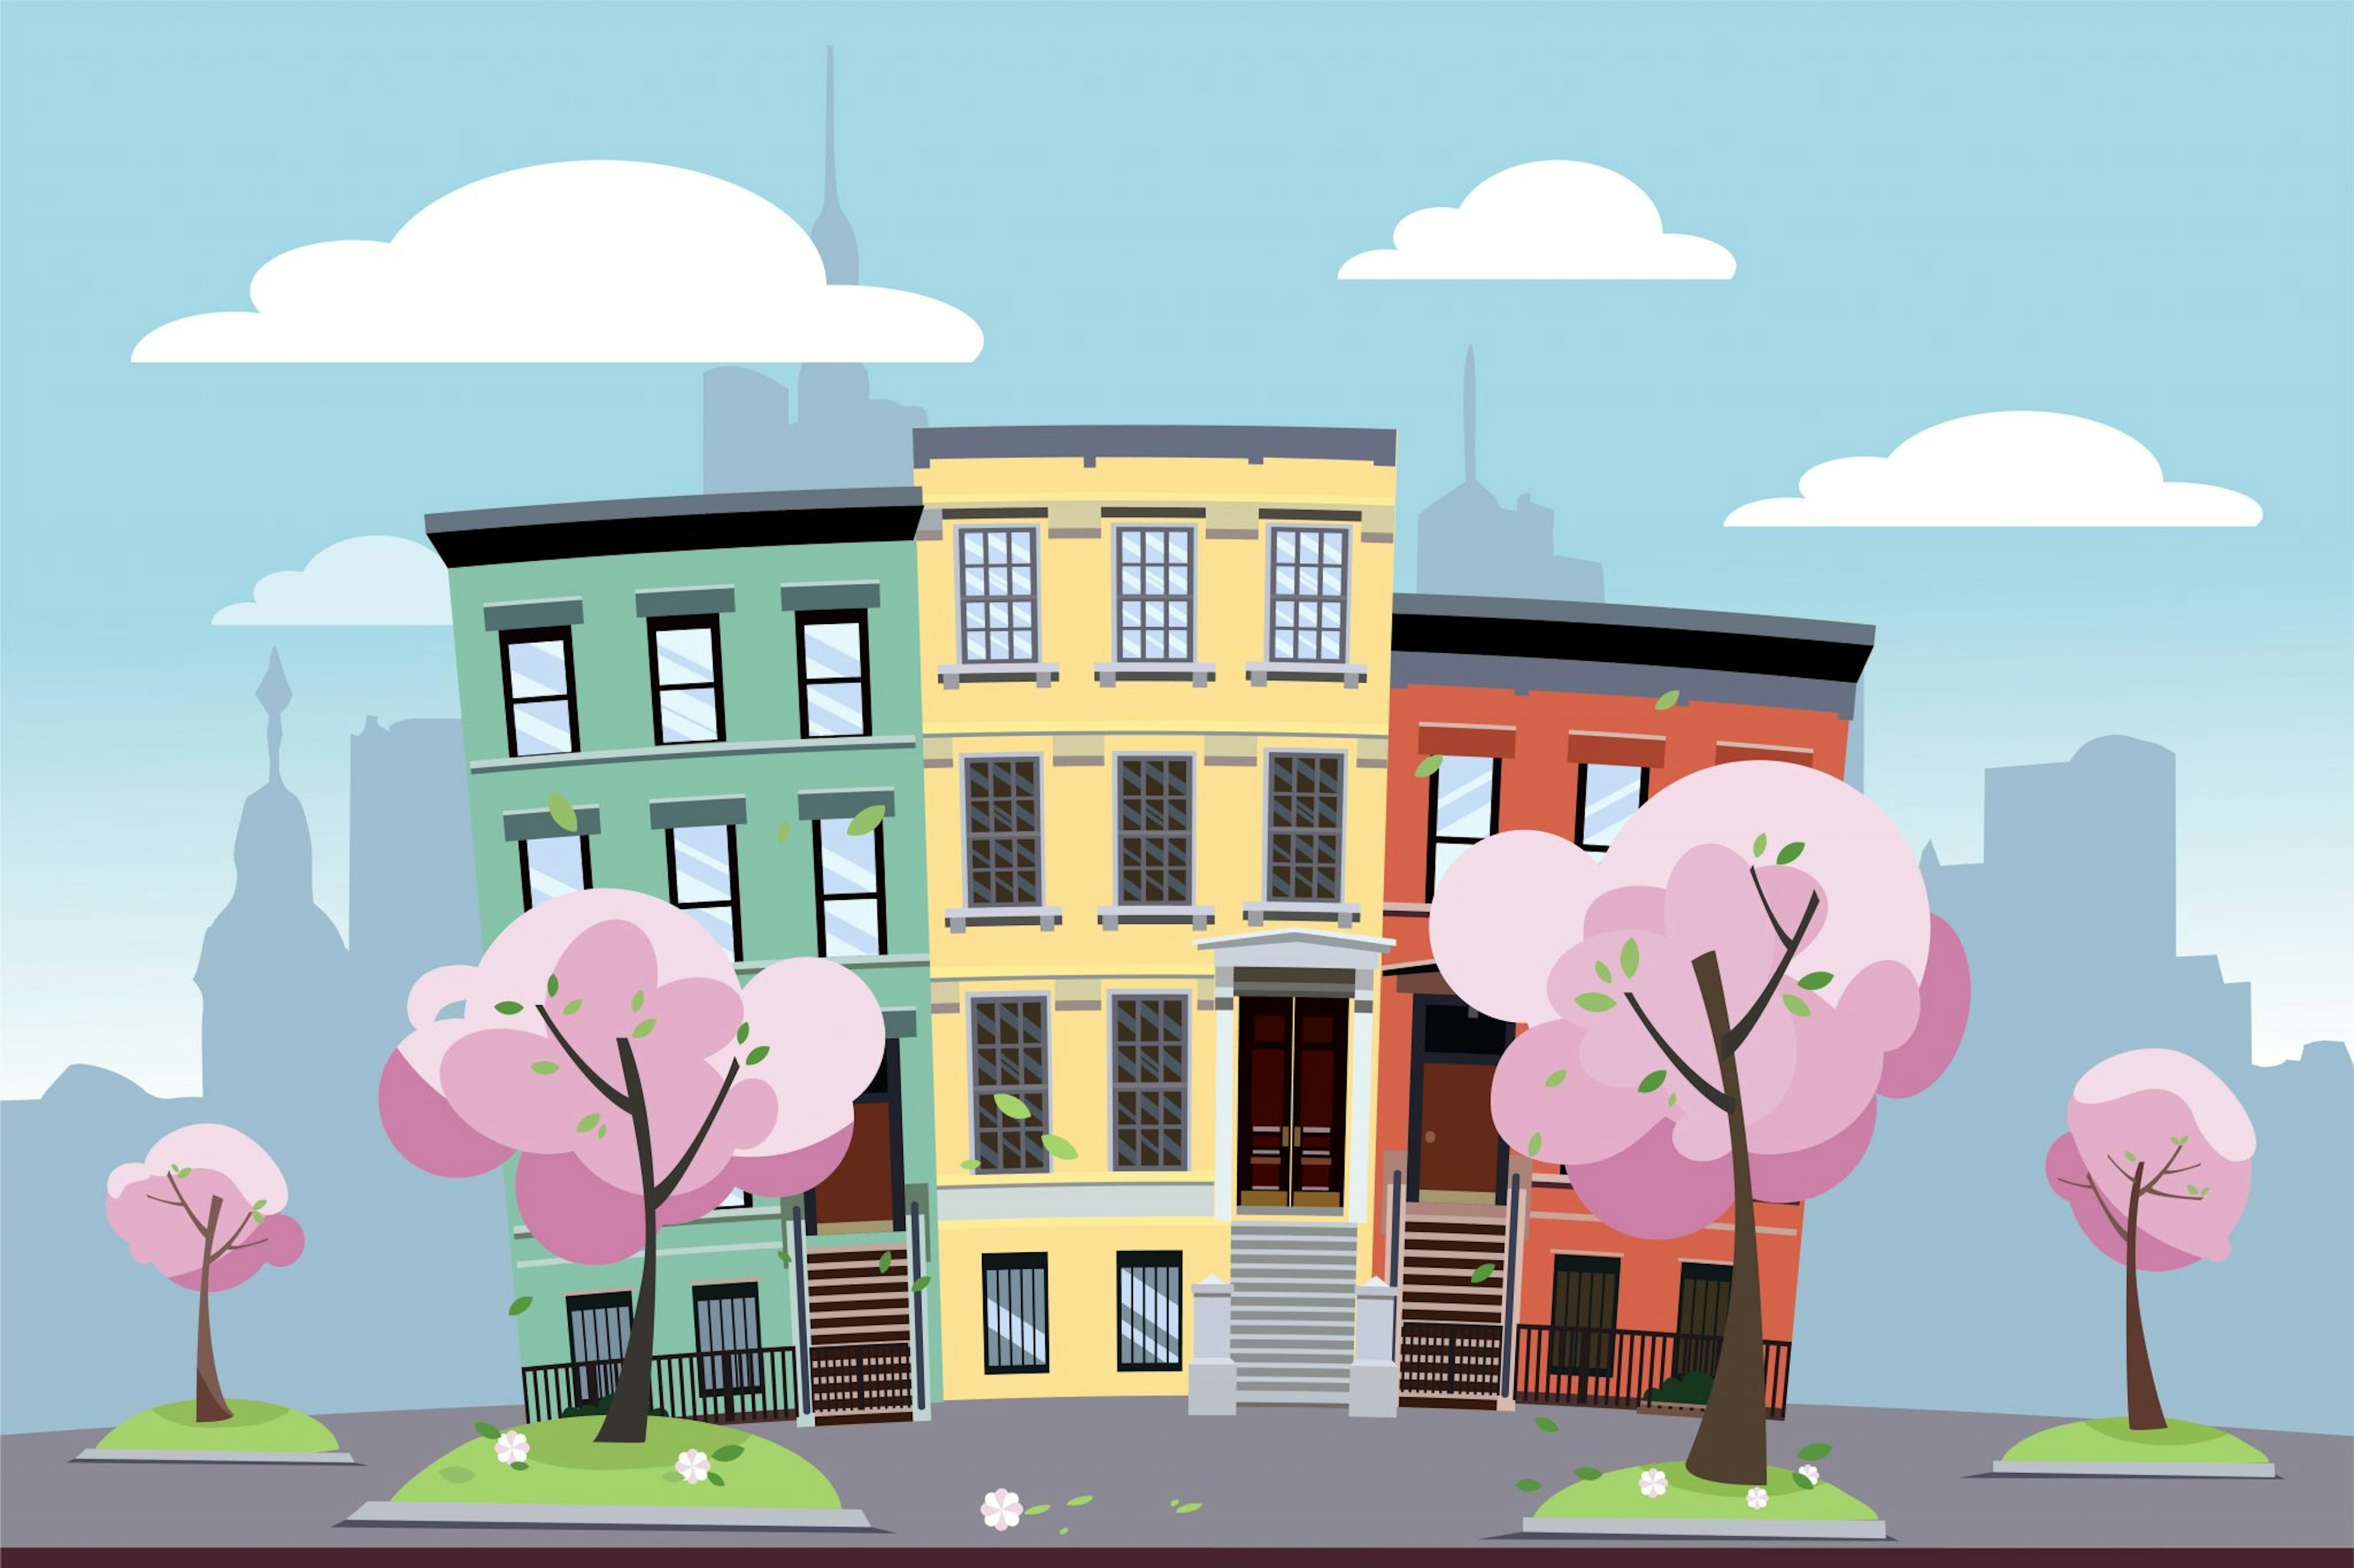 Funny multi-colored low city apartment buildings on the background of a big city. In front of the houses are blooming spring trees on green lawns. Flat cartoon illustration